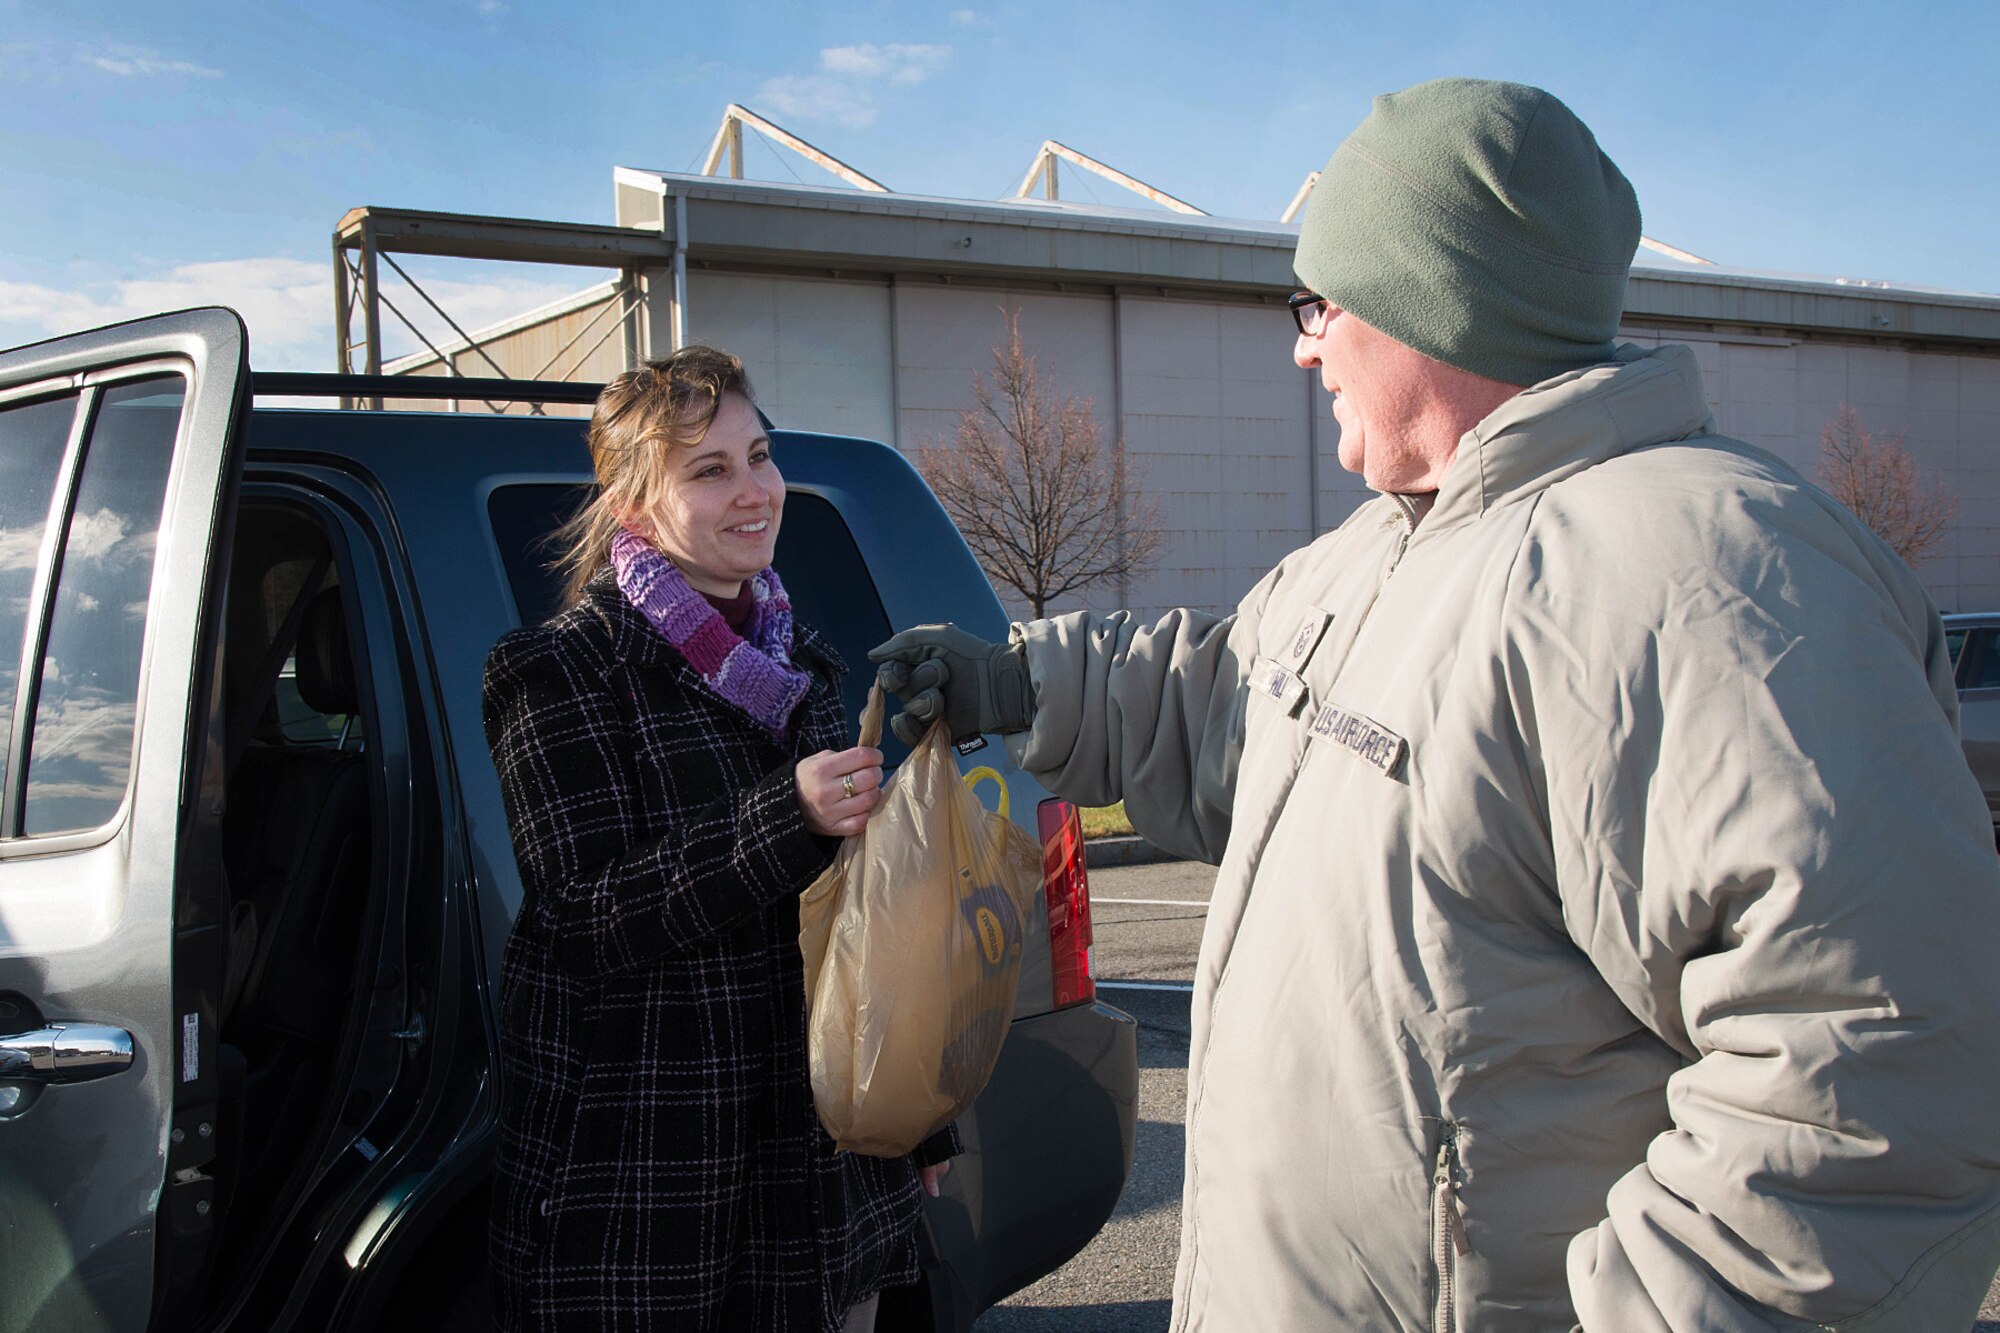 Master Sgt. Stephen Willis, 66th Security Forces Squadron fist sergeant, accepts a turkey donated from Sarah Peattie during a turkey drive in the Commissary parking lot Nov. 18. The annual event is hosted by members of the Chiefs Group, Top Three Association, and First Sergeants Council to collect turkeys for junior enlisted members and civilians in need. (U.S. Air Force photo by Mark Herlihy)